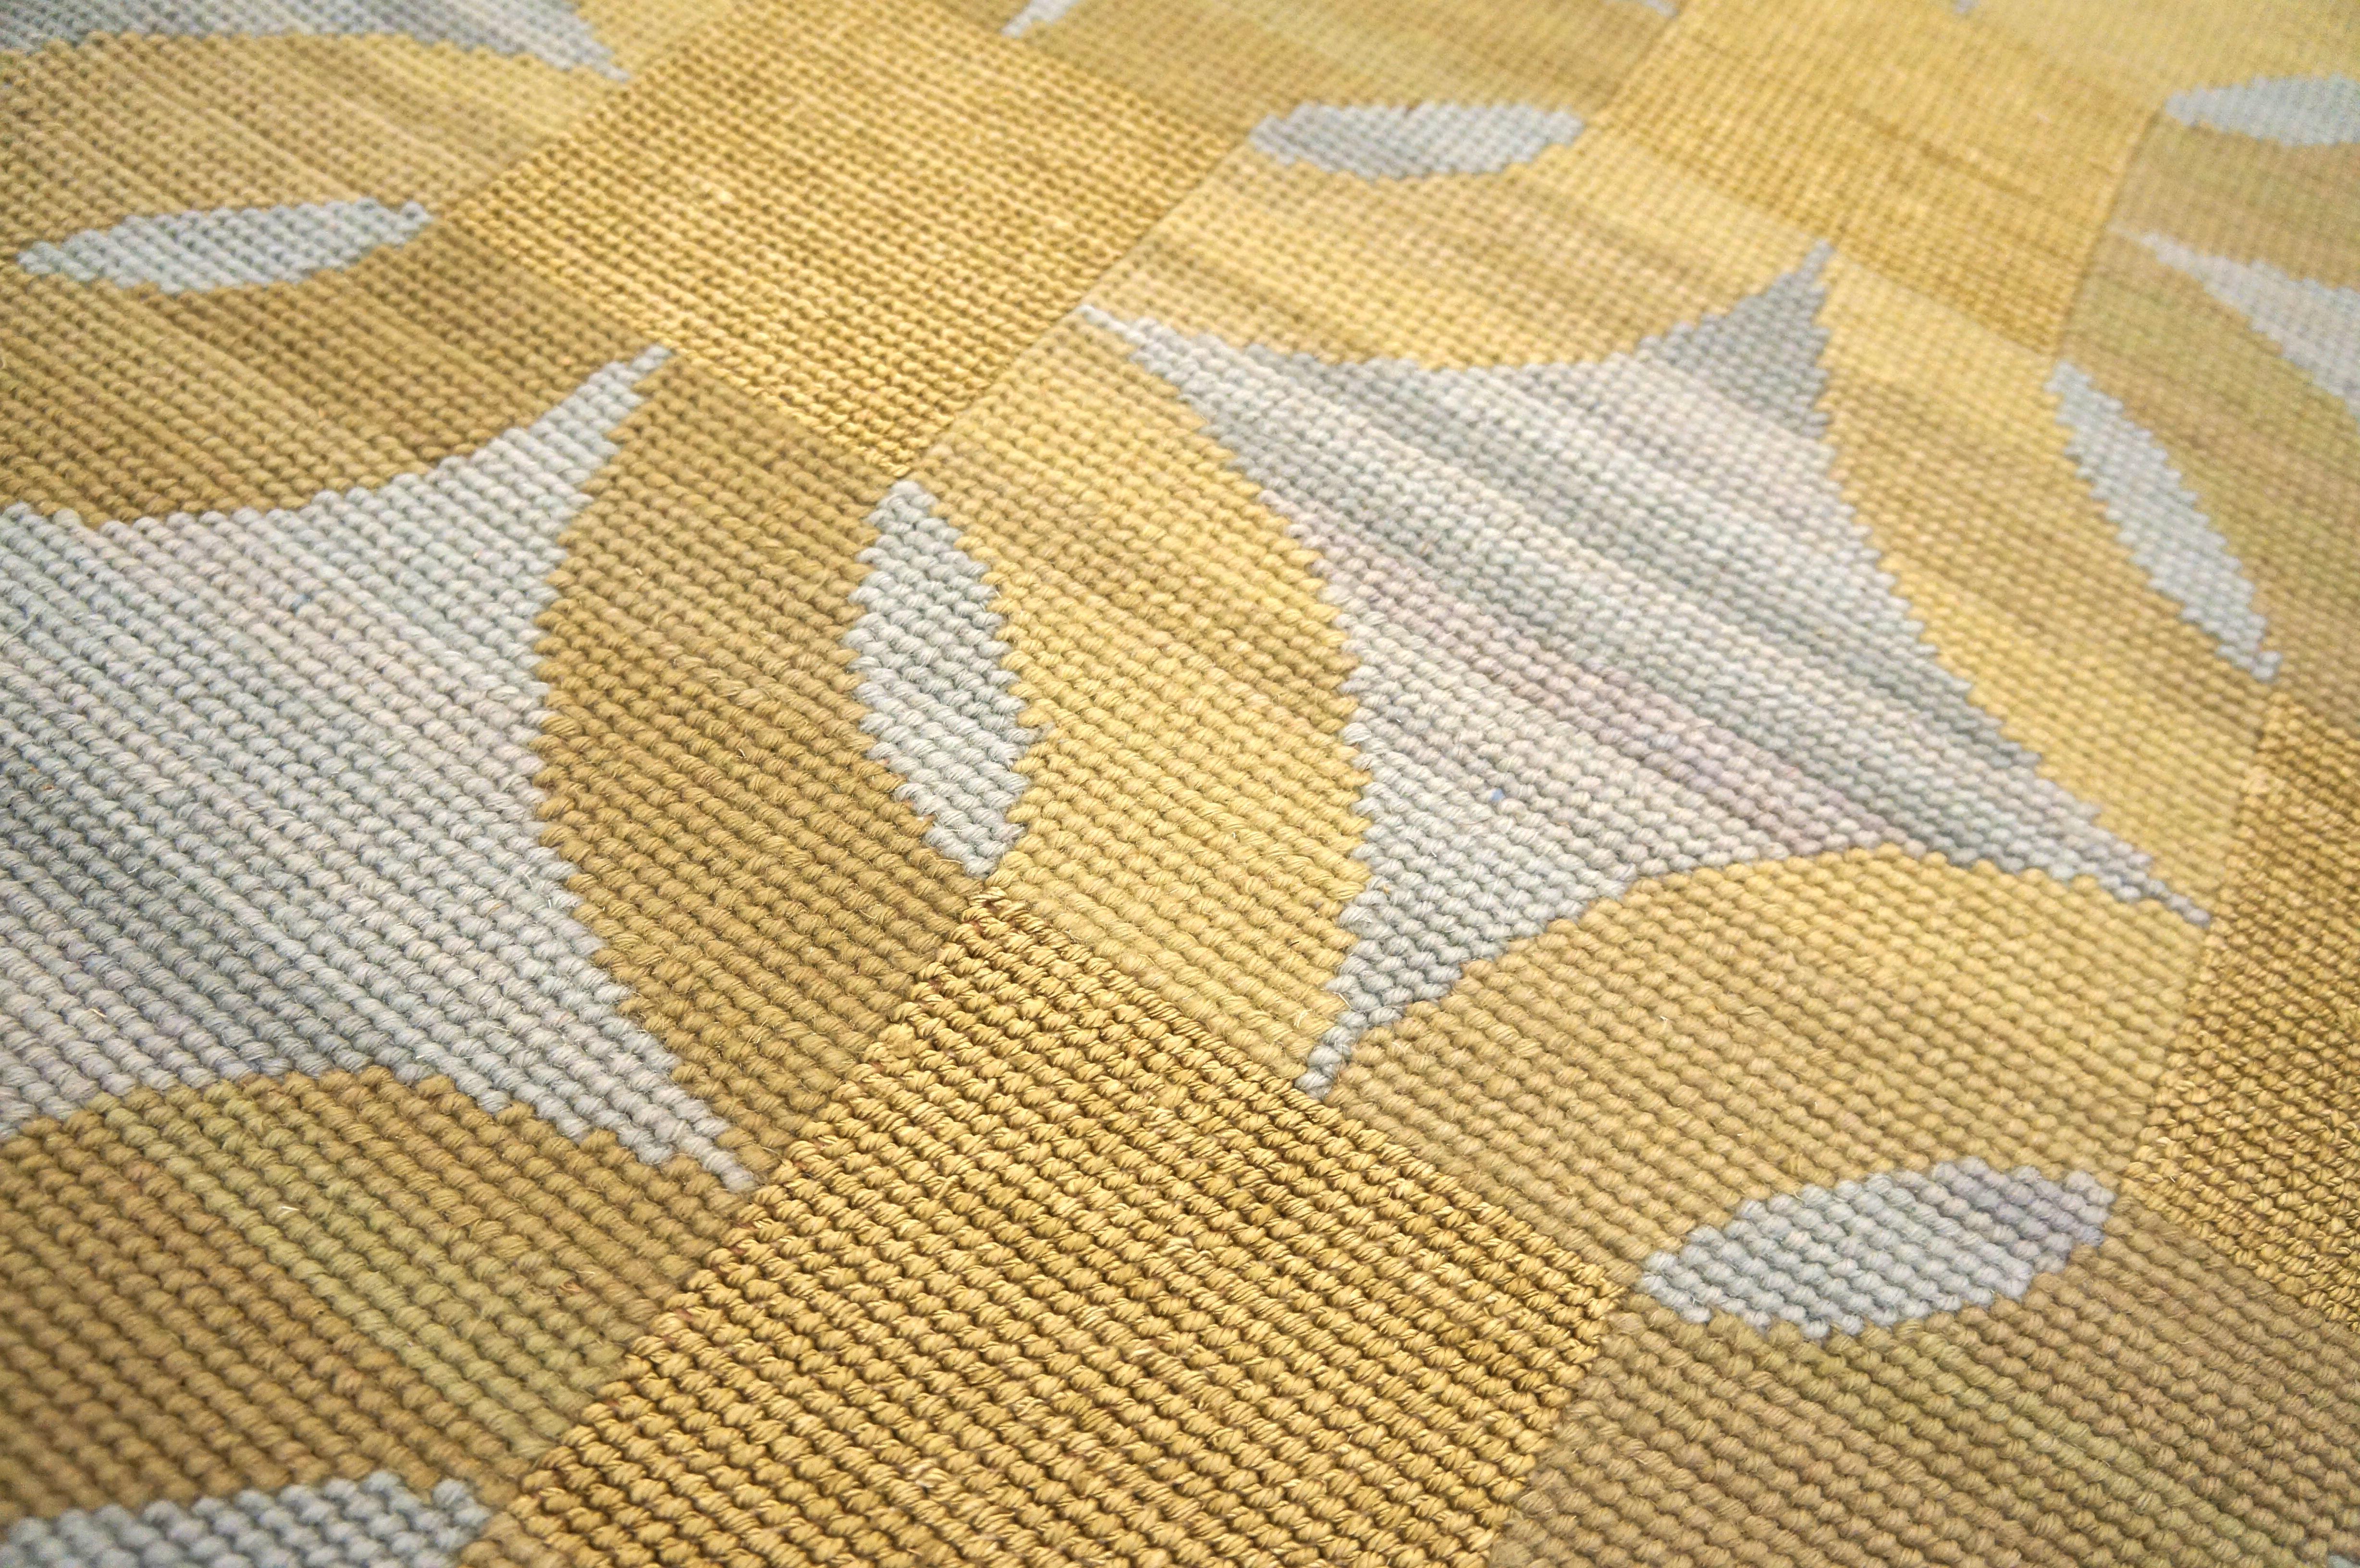 Contemporaneity Handwoven Wool Needlepoint Flat Weave Carpet With Silk Highlight For Sale 2